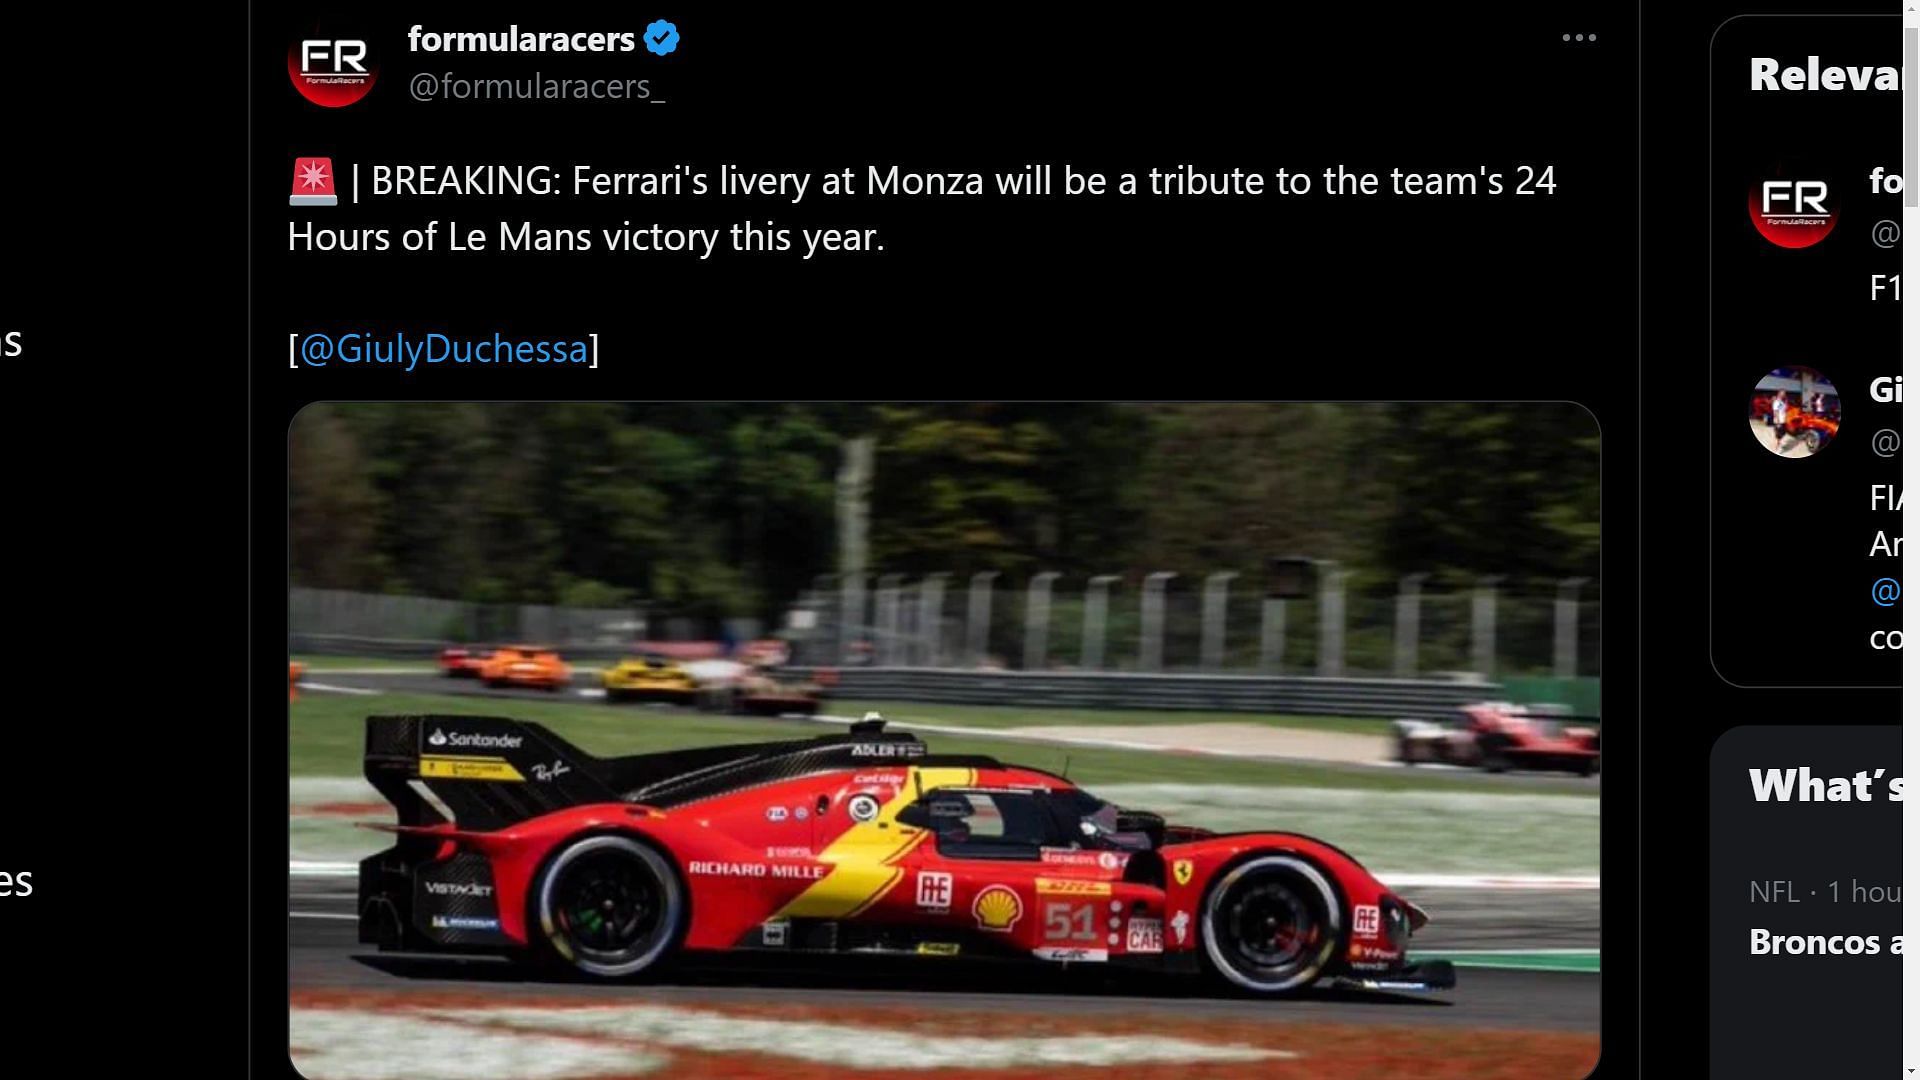 Tweet about Ferrari&#039;s rumored special livery for F1 to honor their WEC Le Mans victory (Image via Sportskeeda)